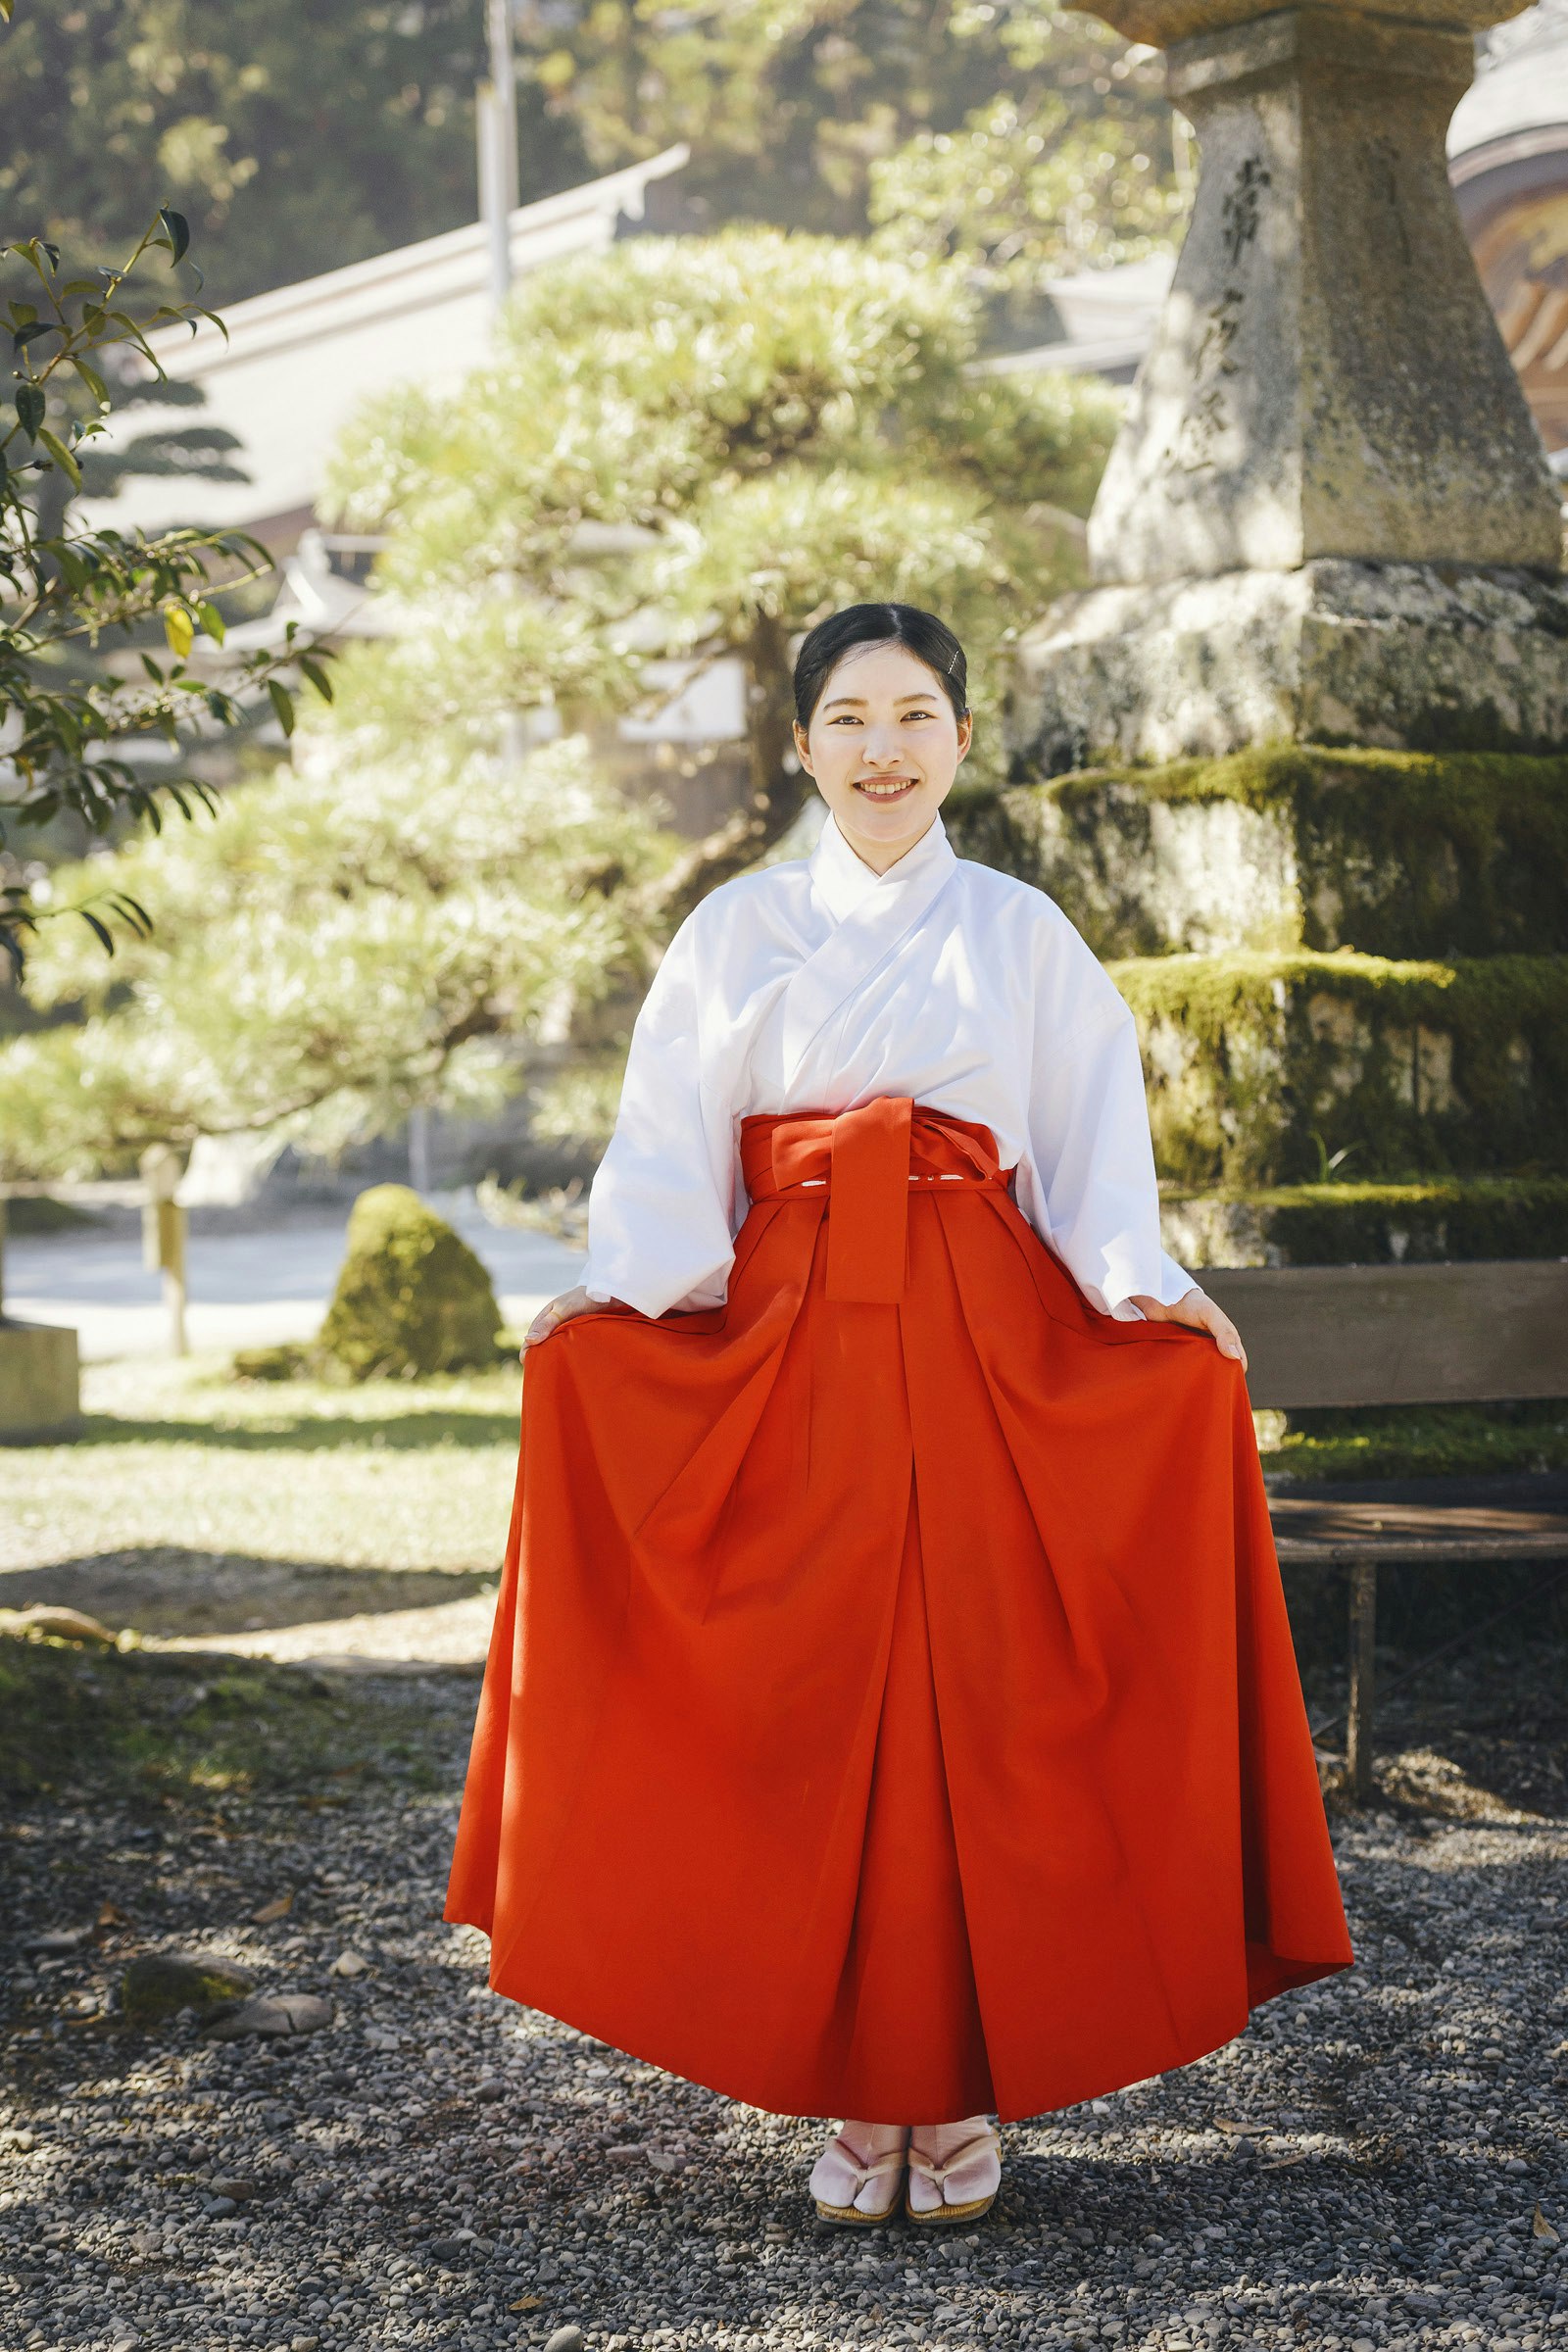 Ami Ozaki in the white-and-red costume of a shrine maiden